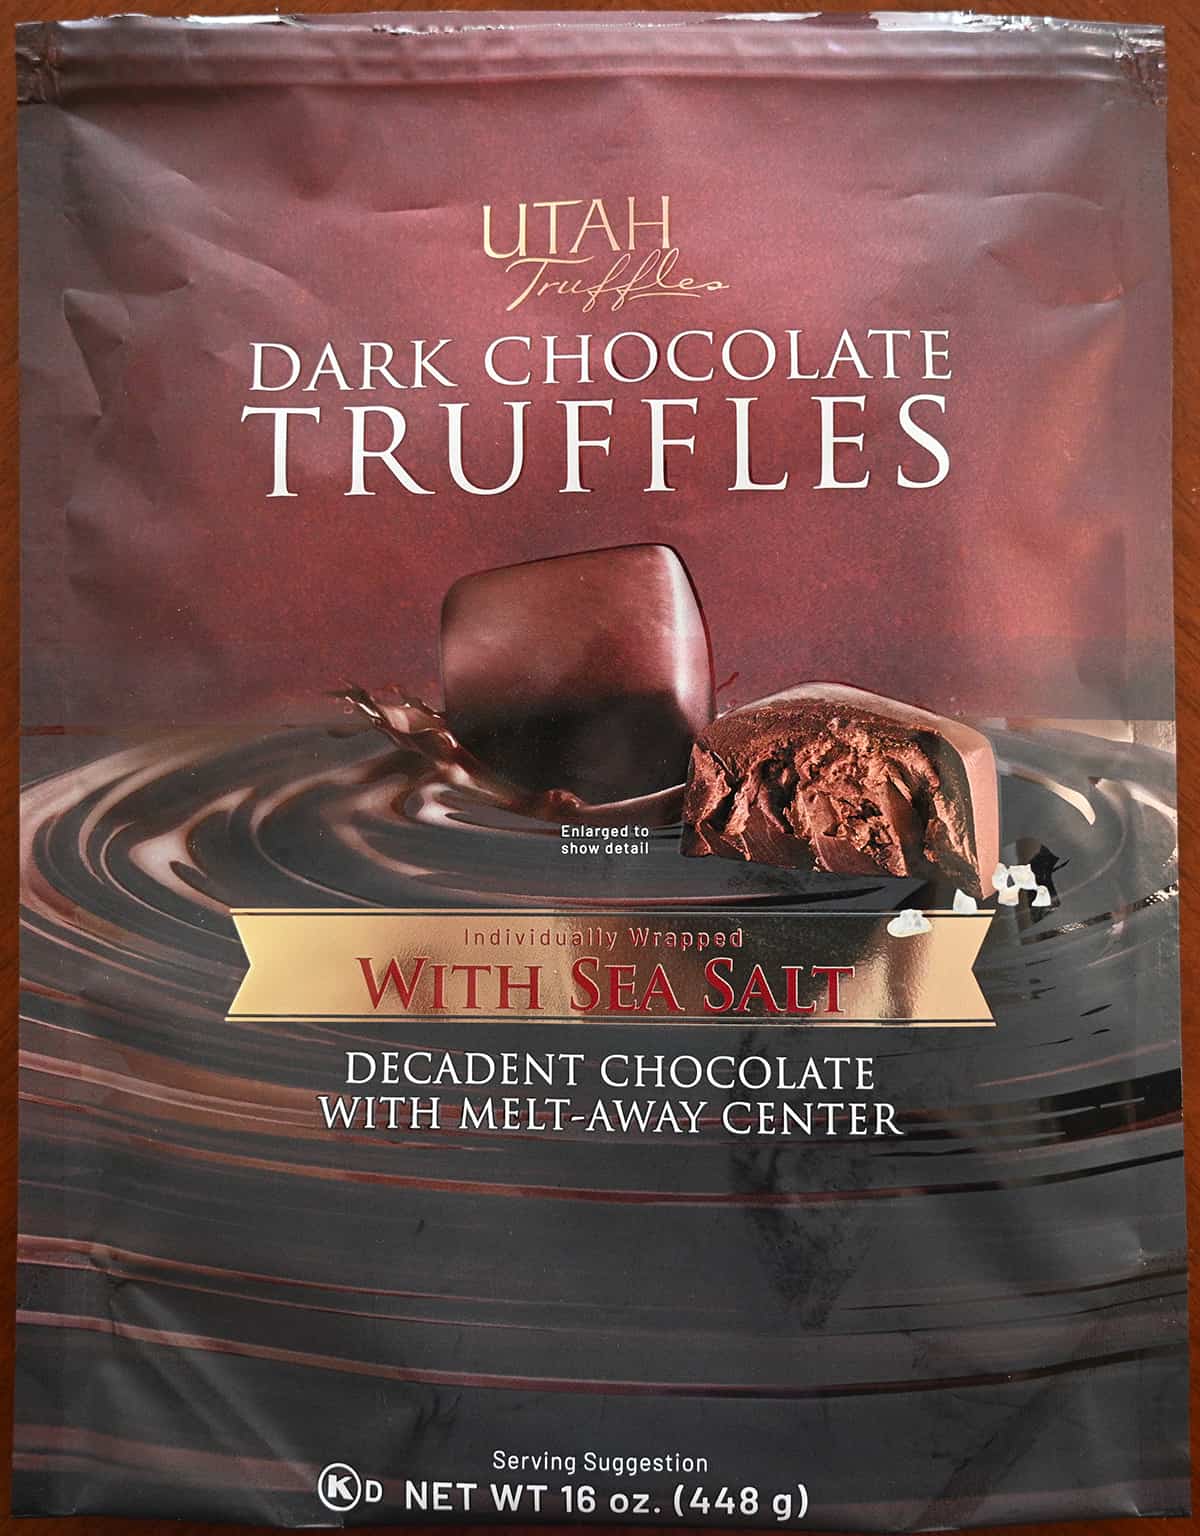 Closeup image of the front of the bag of dark chocolate with sea salt truffles showing size of the bag and product description.